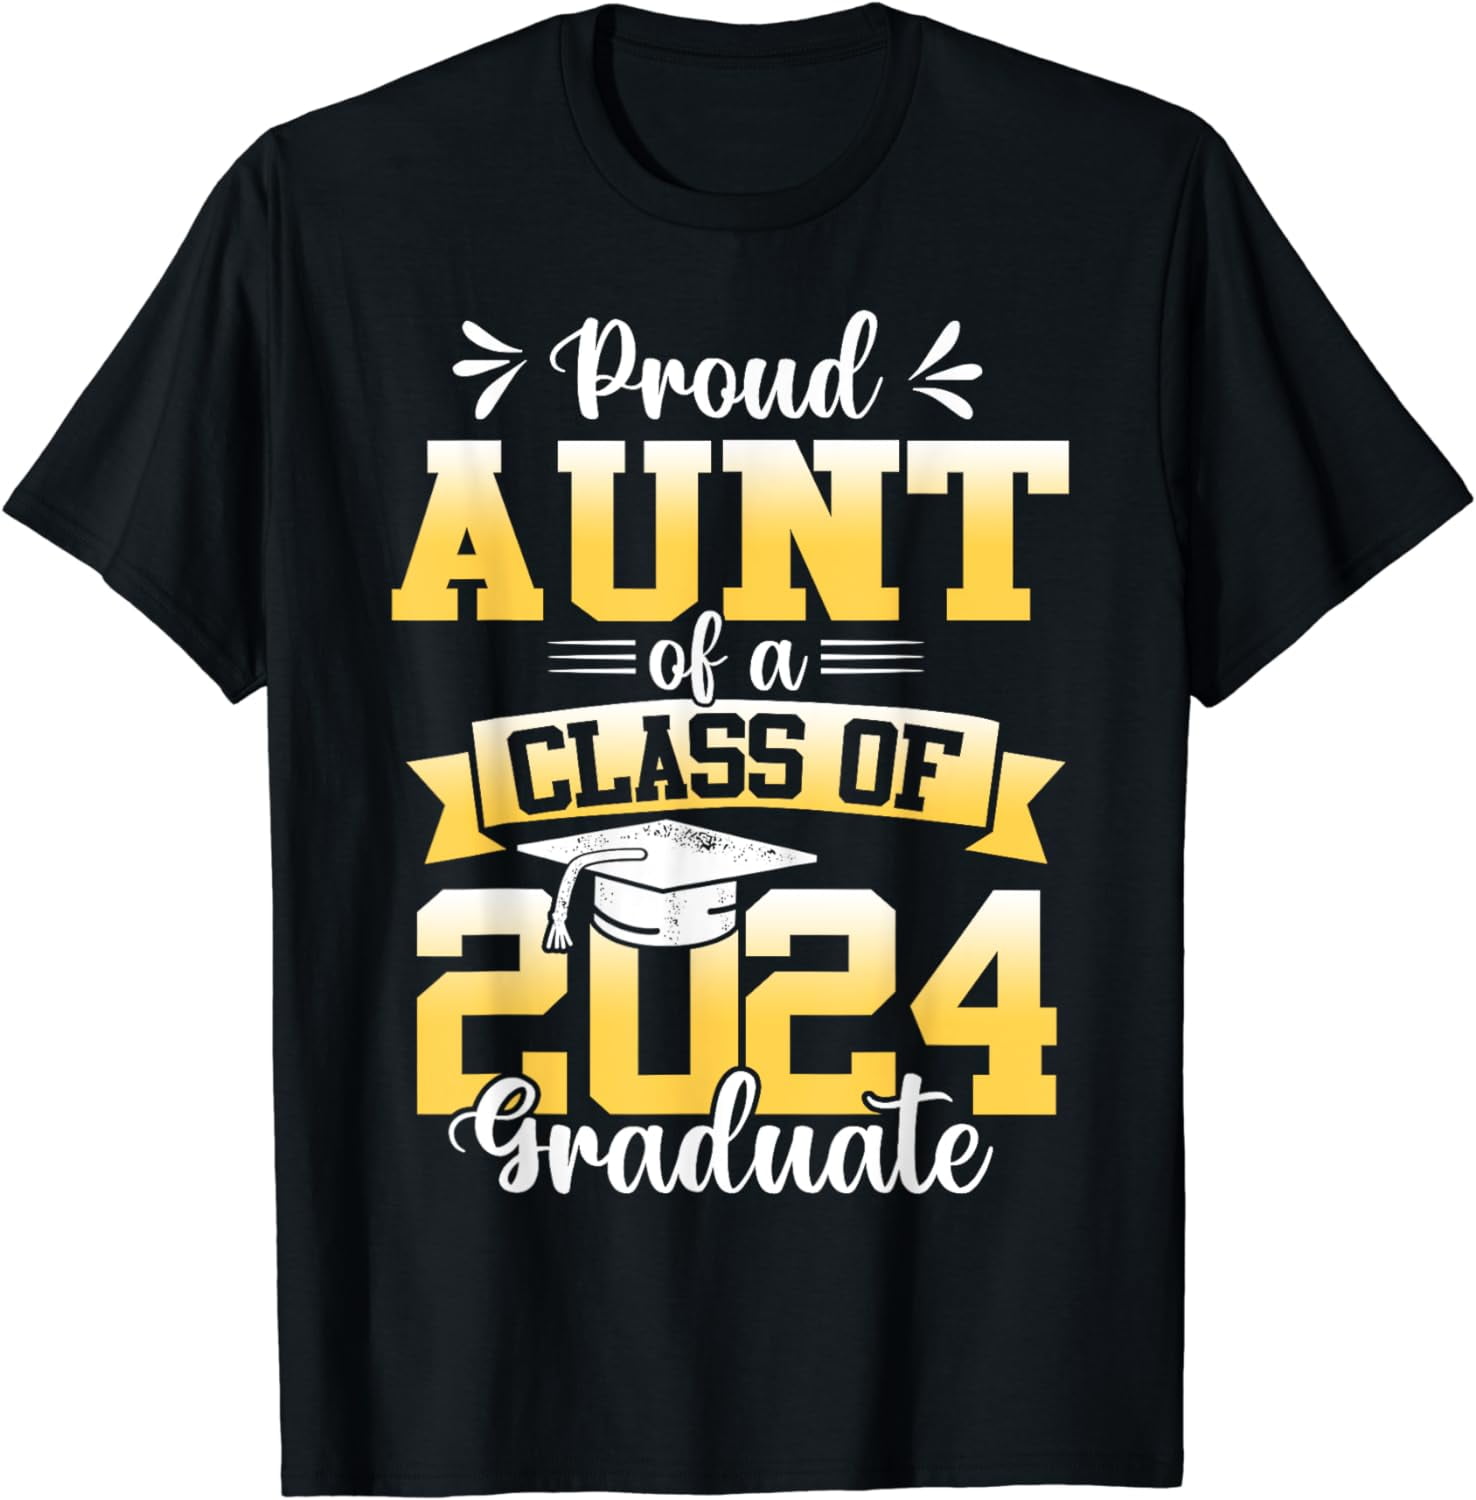 Super Proud Aunt of 2024 Graduate Awesome Family College T-Shirt ...